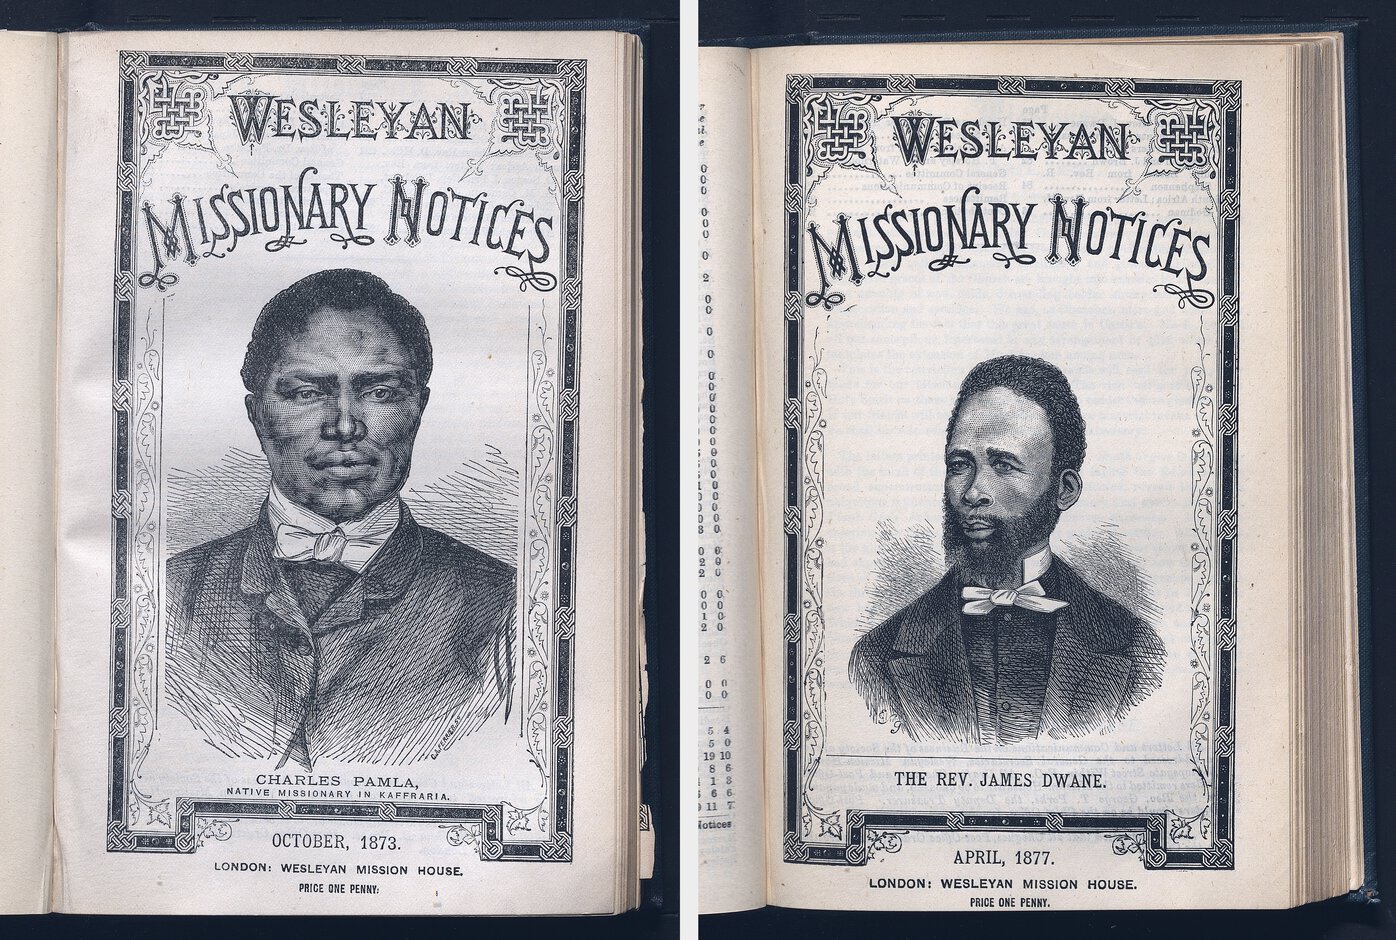 Title pages of Wesleyan Missionary Notices with illustrations of, left, Charles Pamla and, right, James Dwane.